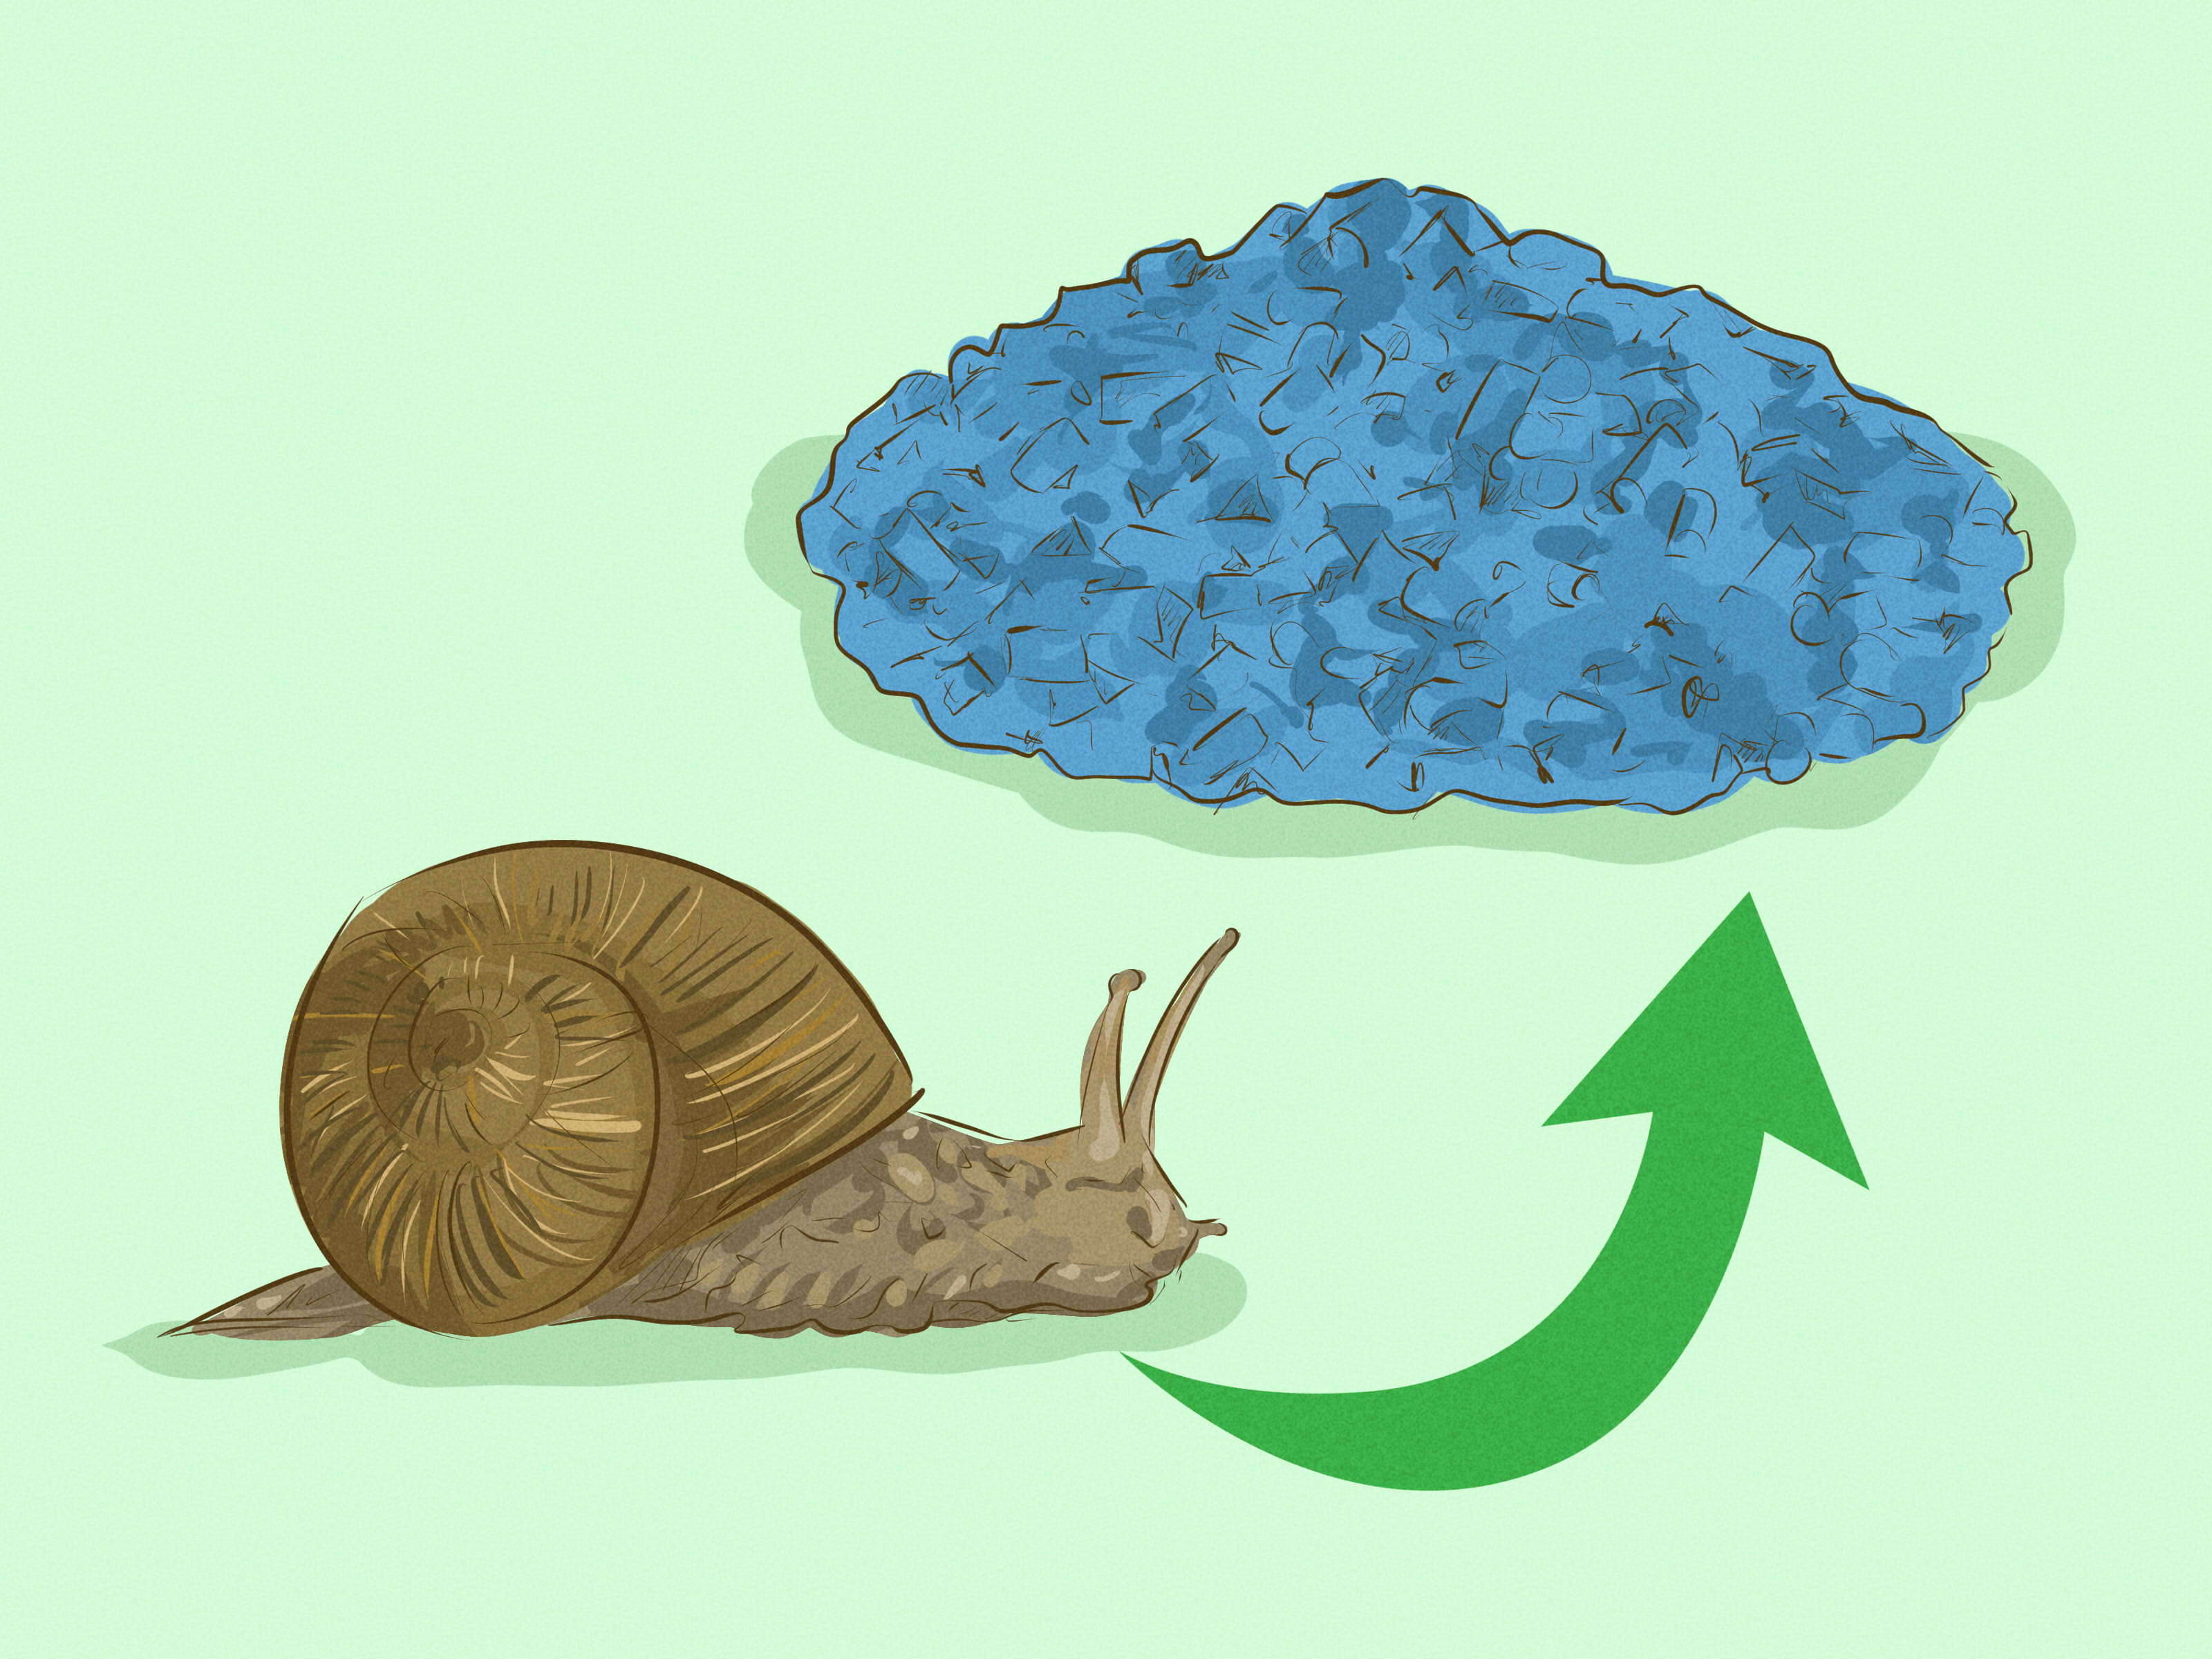 4 Ways to Get Rid of Garden Snails - wikiHow